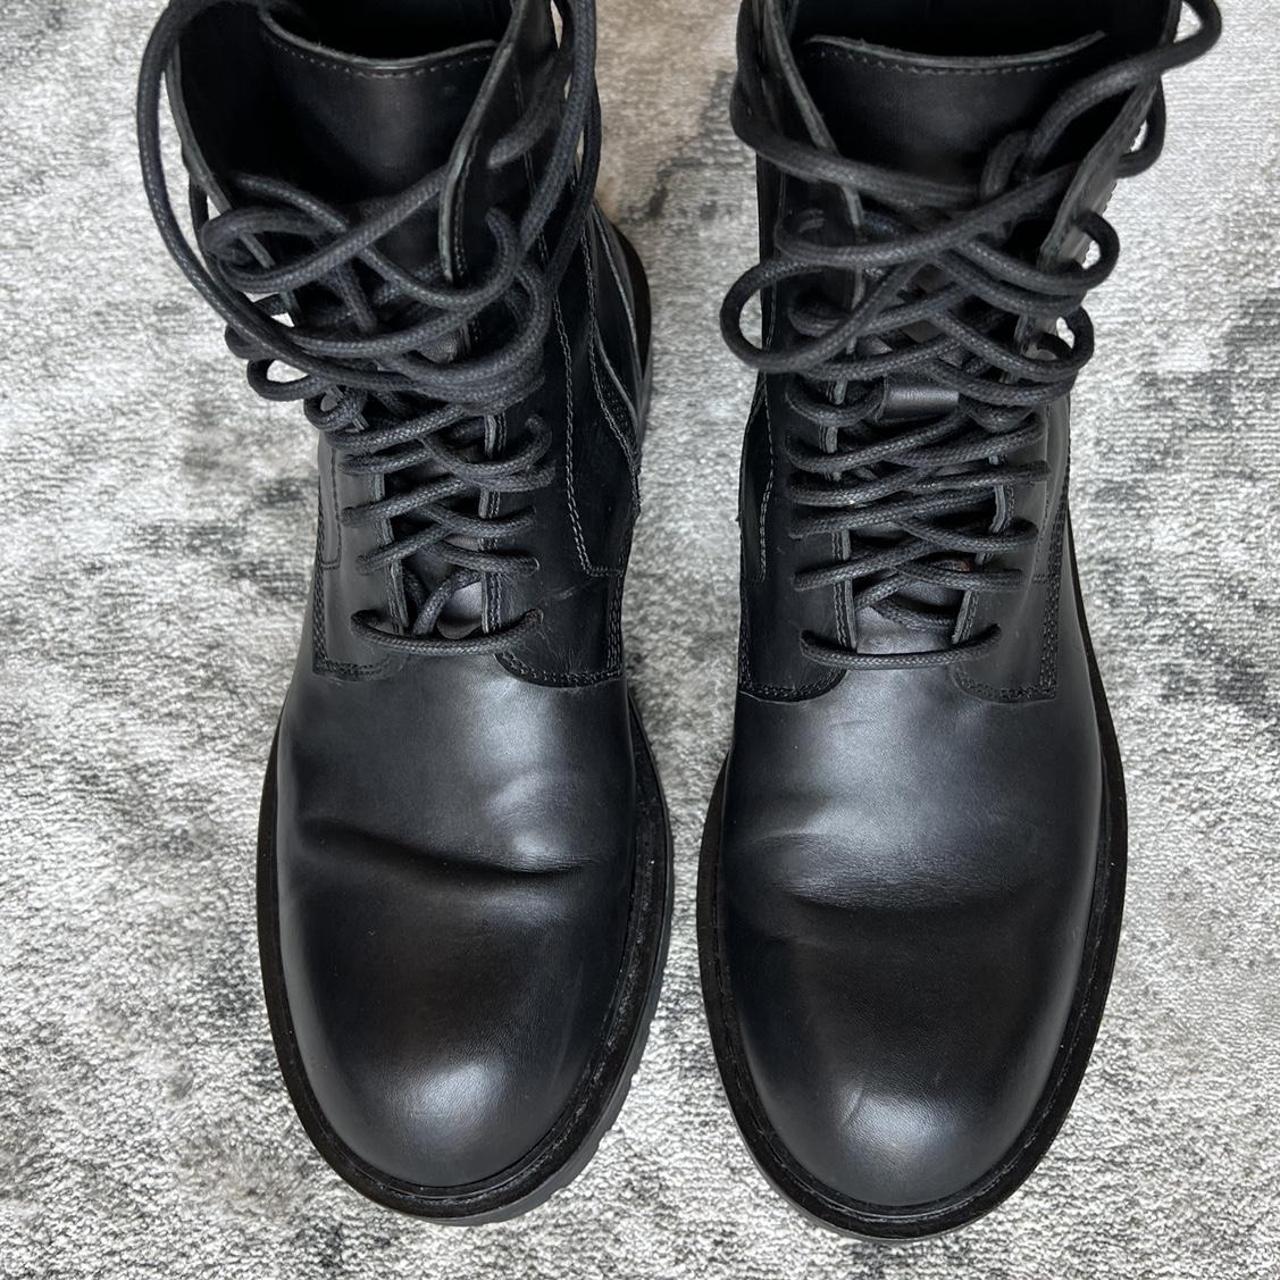 Product Image 4 - Military Combat Boots

Tagged size is